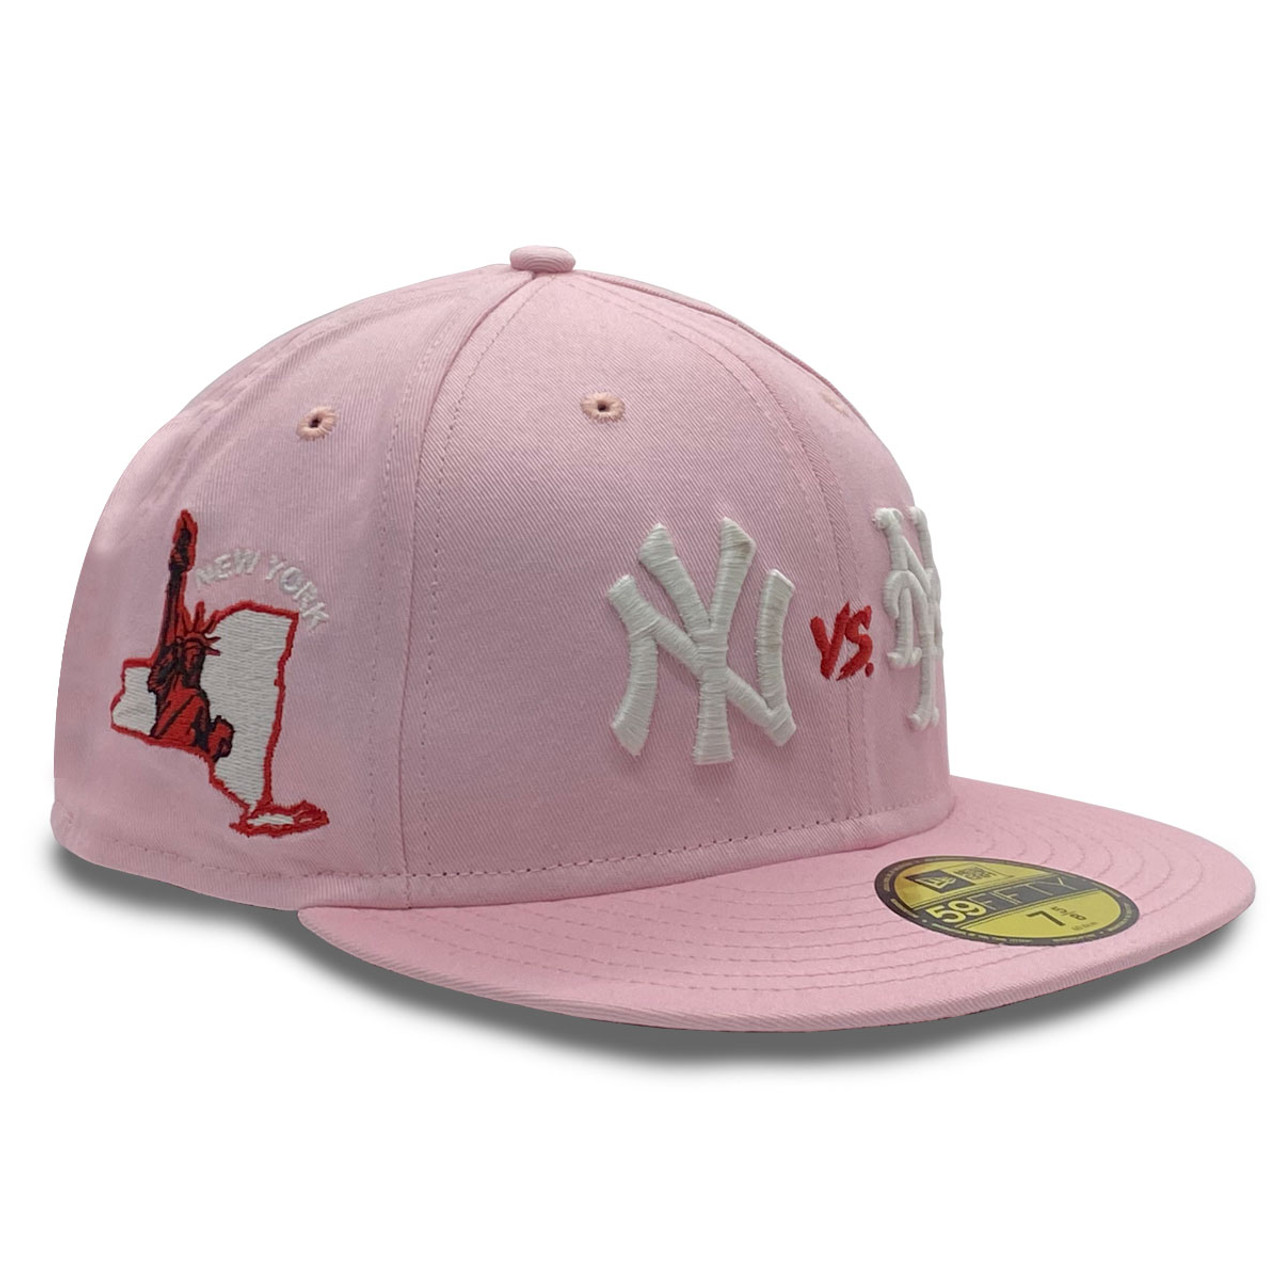 Men's New Era White/Pink York Yankees Chrome Rogue 59FIFTY Fitted Hat